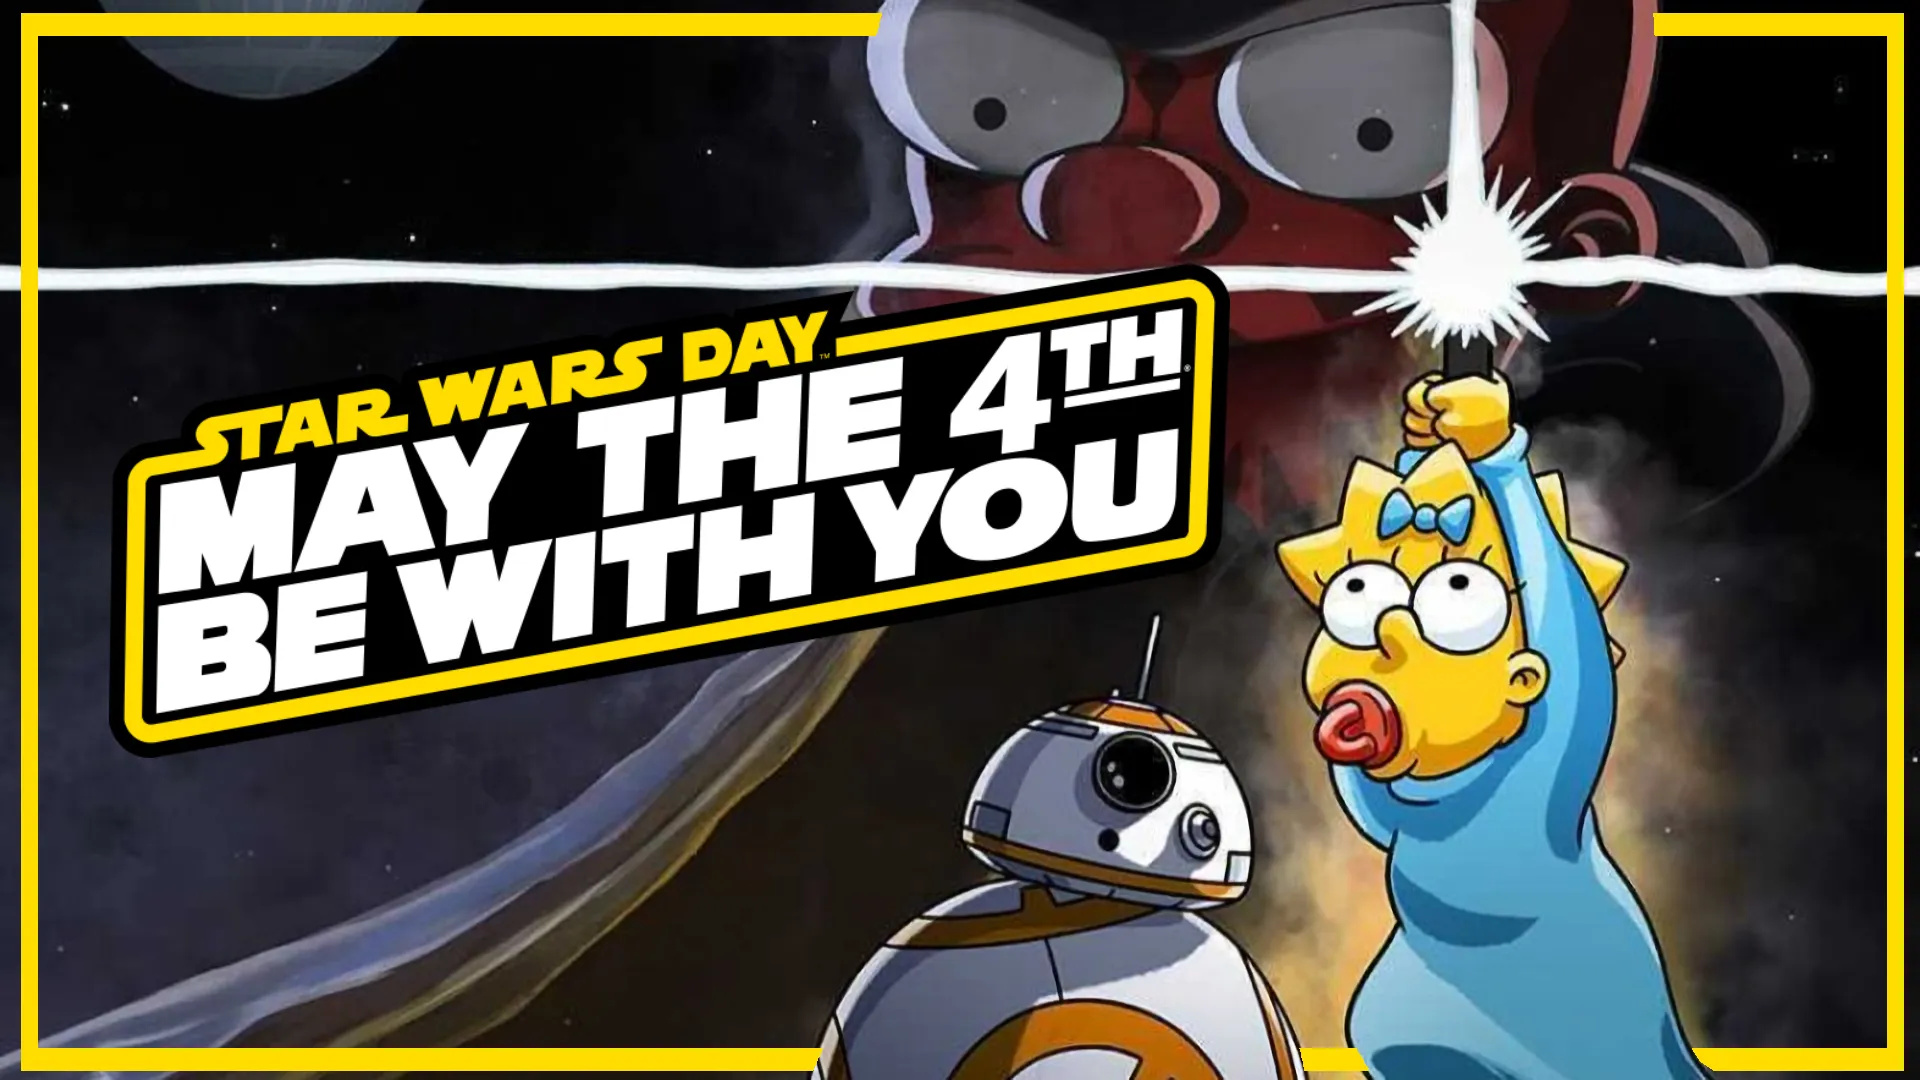 HD wallpaper, The Force Awakens, 1920X1080 Full Hd Desktop, Simpsons Short, Desktop Full Hd May The 4Th Star Wars Day Wallpaper Image, May The 4Th Events, Interactive Experiences